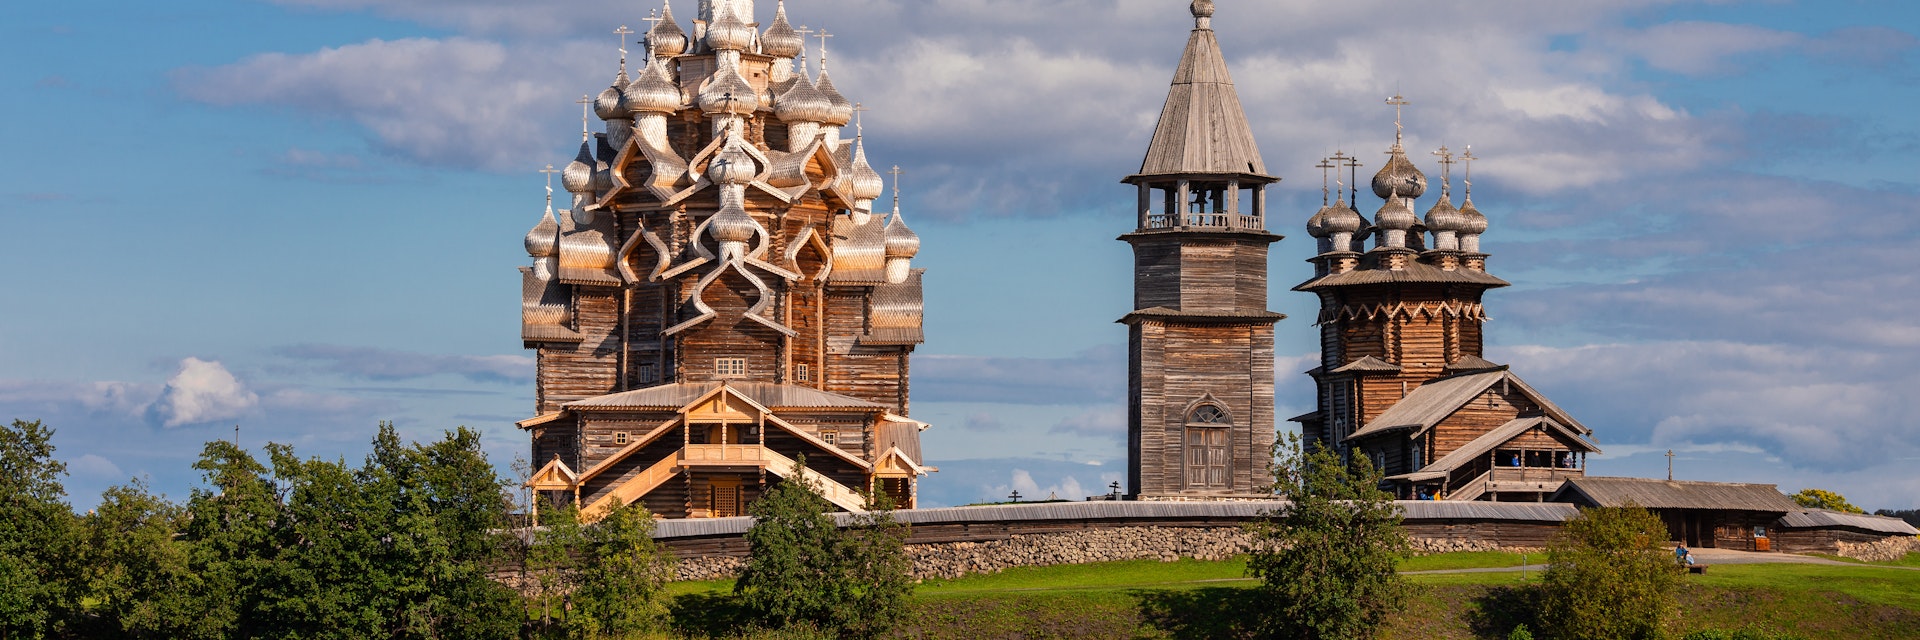 17th-century wooden churches and bell tower of Kizhi Pogost historical site.